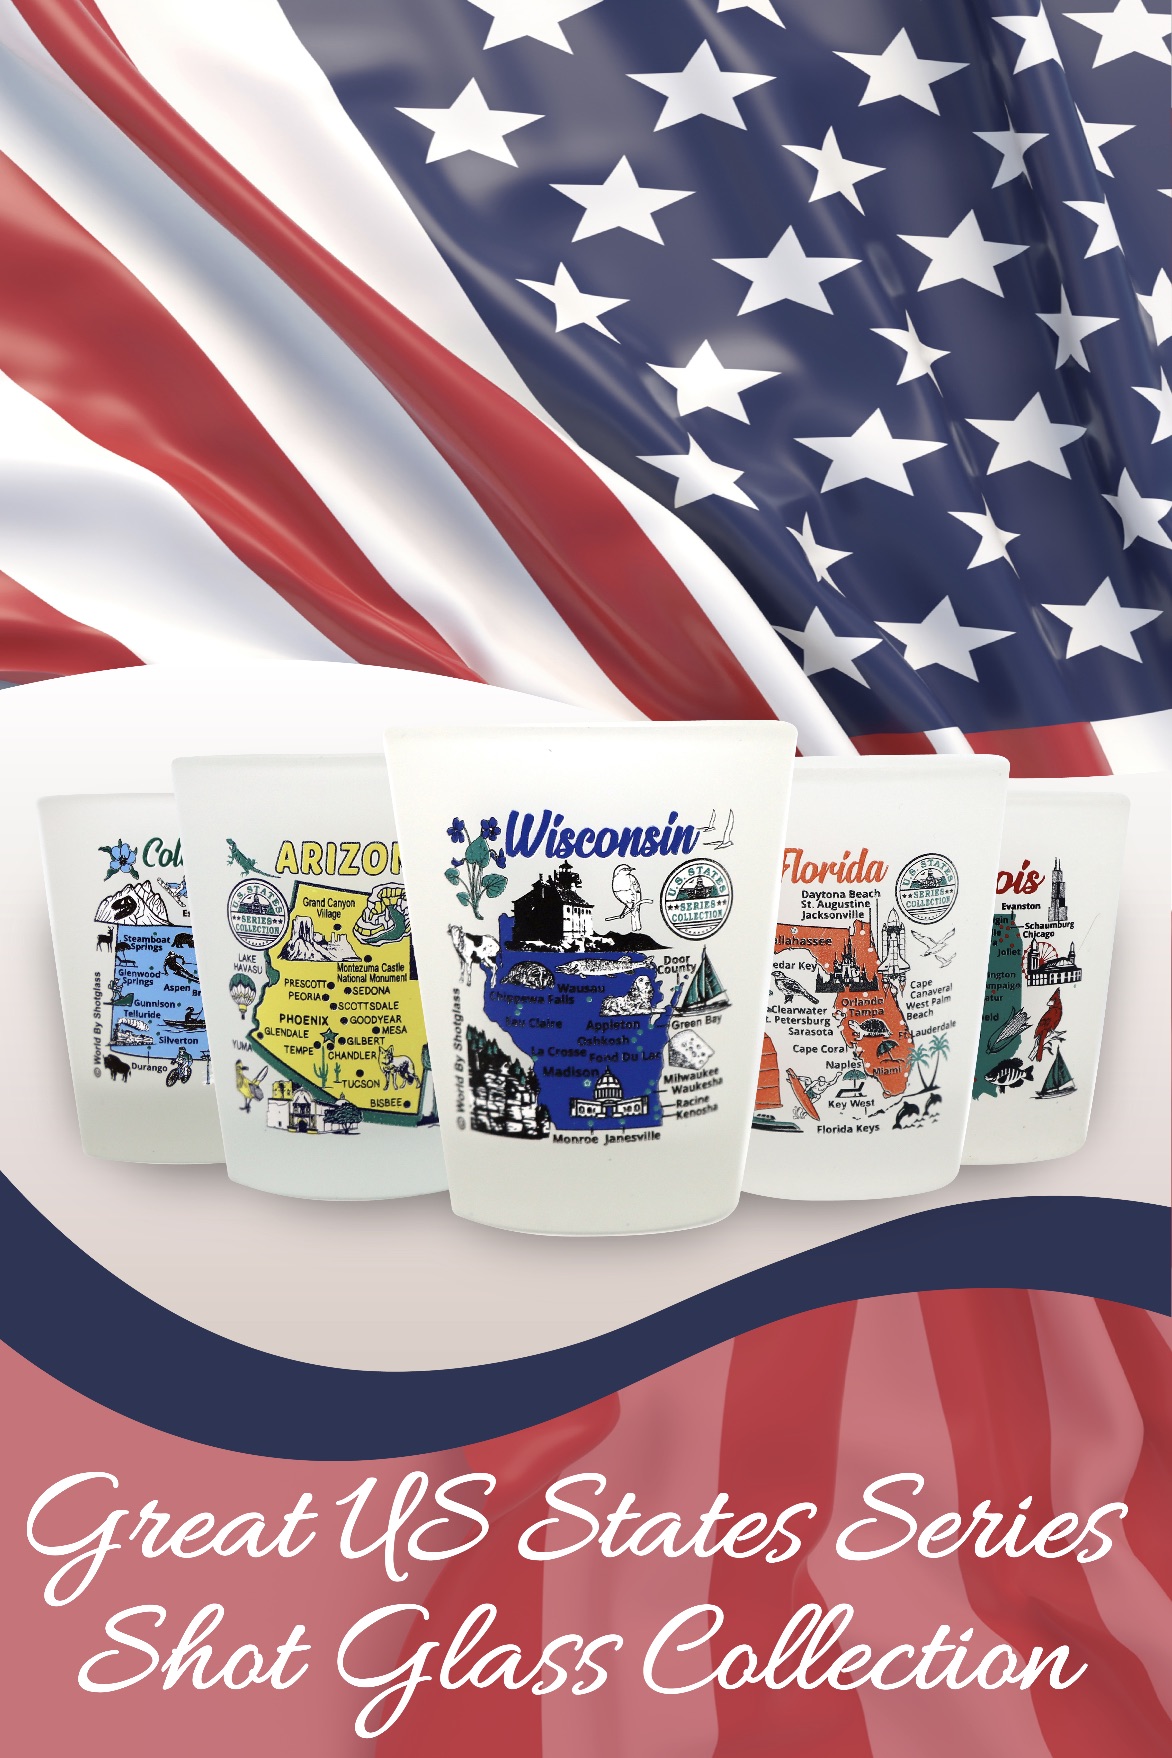 50 States US States Series Shot Glass Collection